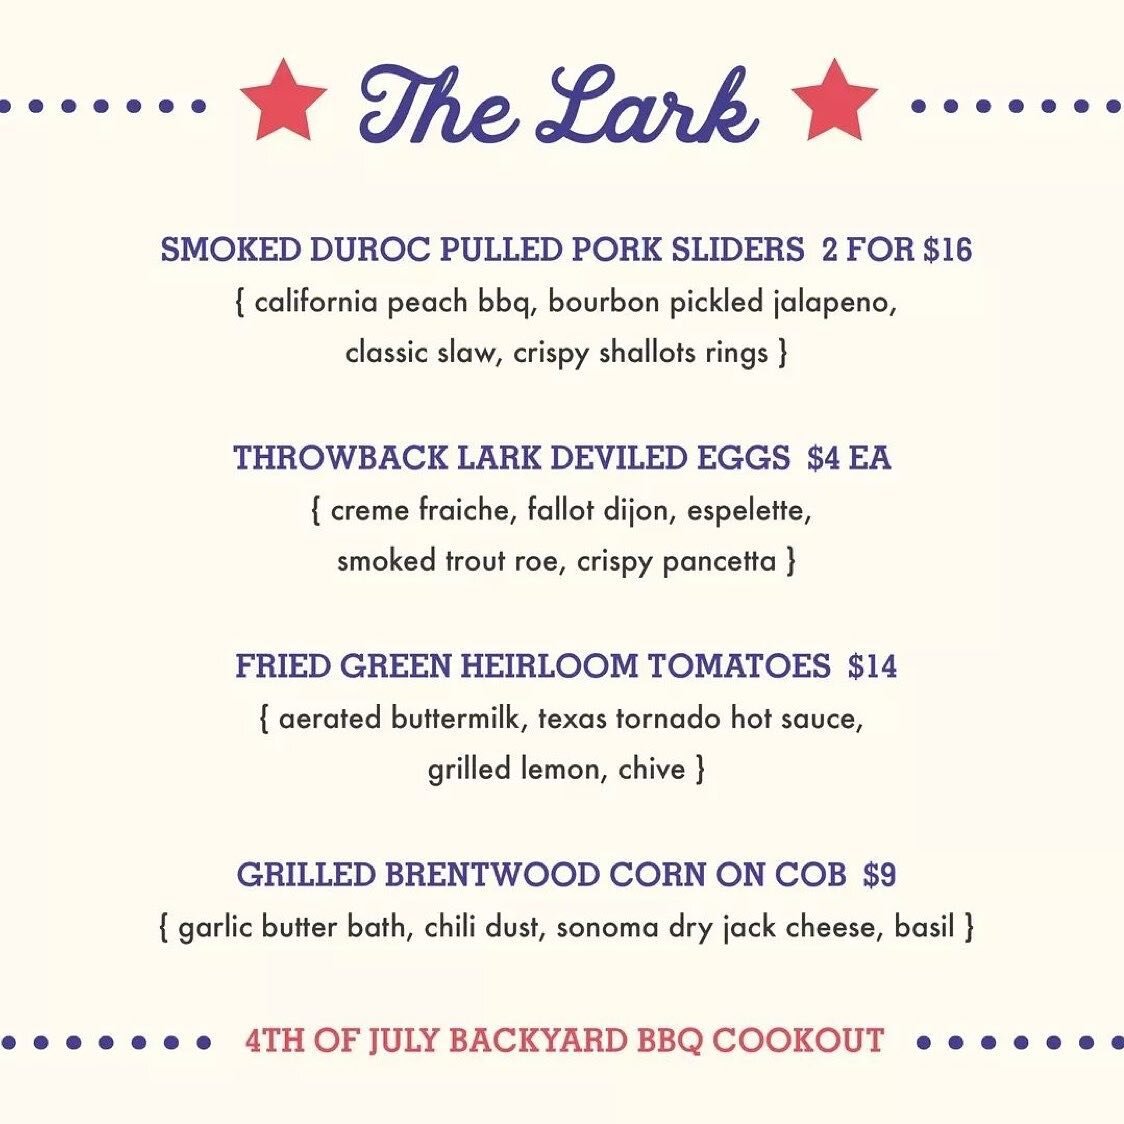 #july4th #barbecue at @thelarksb #Fireworks in your mouth. By @jasonpaluska Repost from @thelarksb
&bull;
The Lark 4th of July Cook Out menu is here!&nbsp;🍖 

​​Join us for Executive Chef Jason Paluska's special Independence Day Backyard BBQ Cook Ou